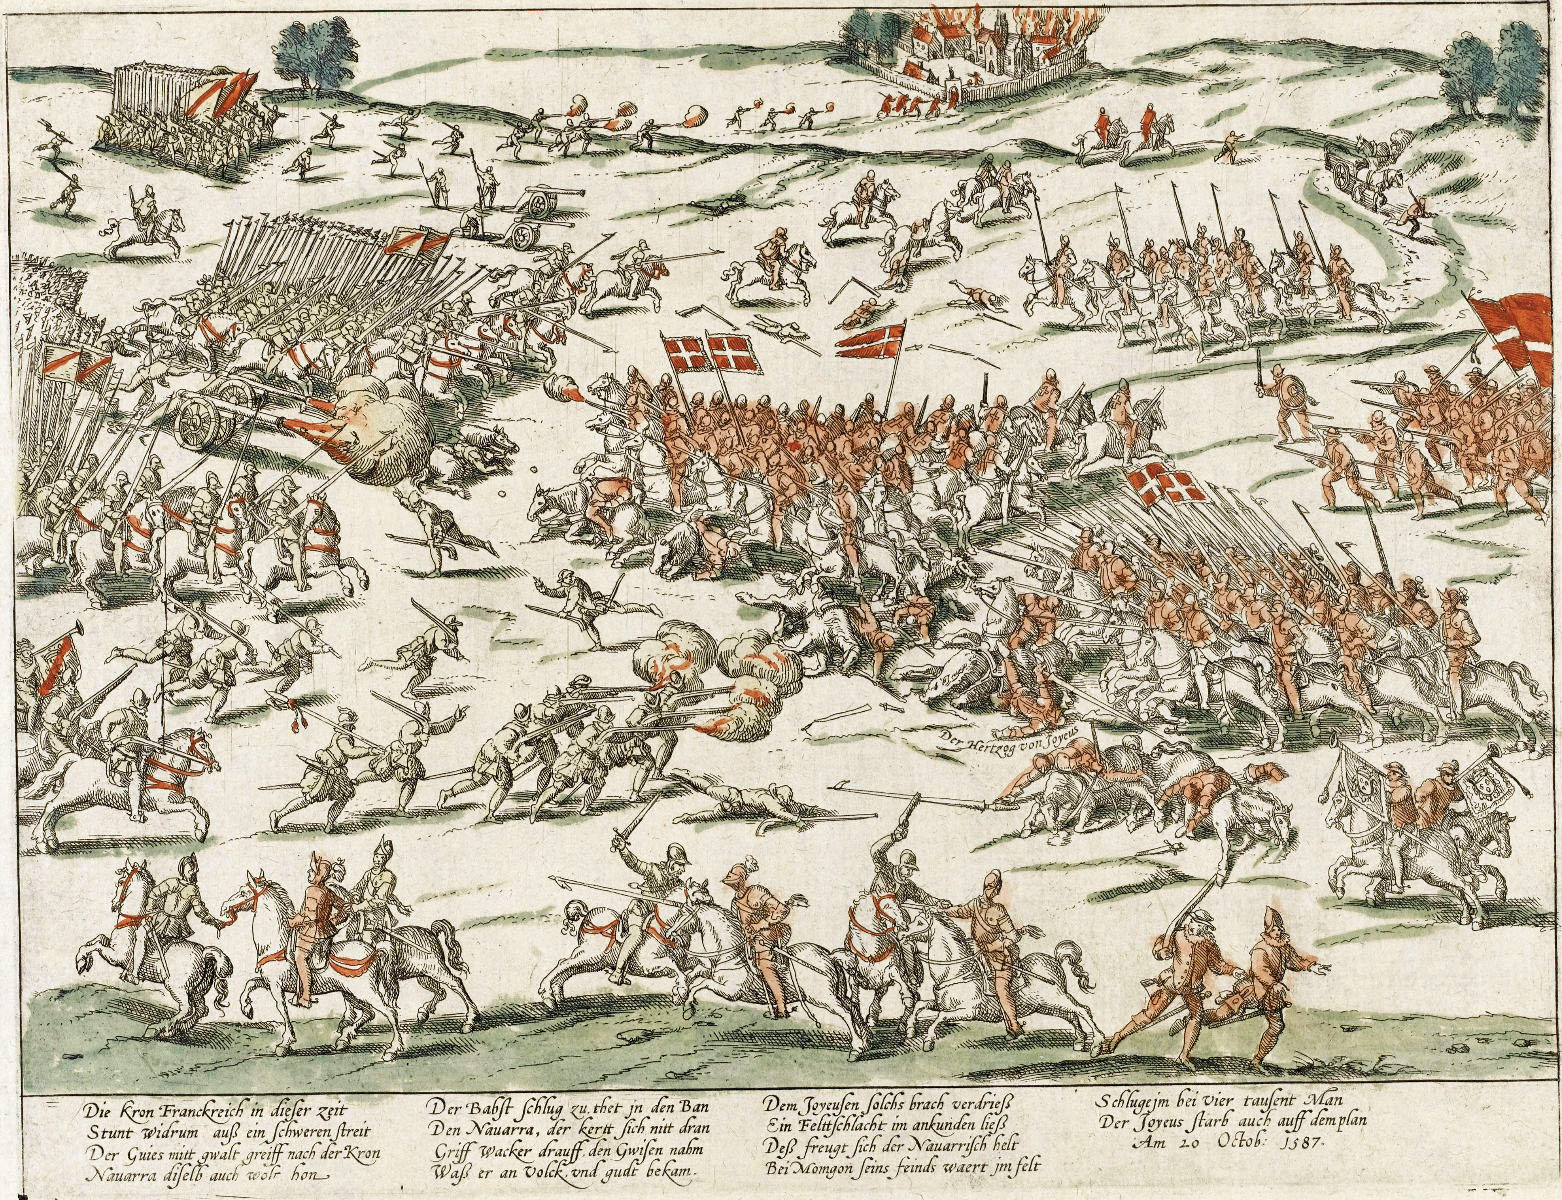 Henry de Navarre’s victory over a Catholic army at Coutras on October 20, 1587, enhanced his military reputation.